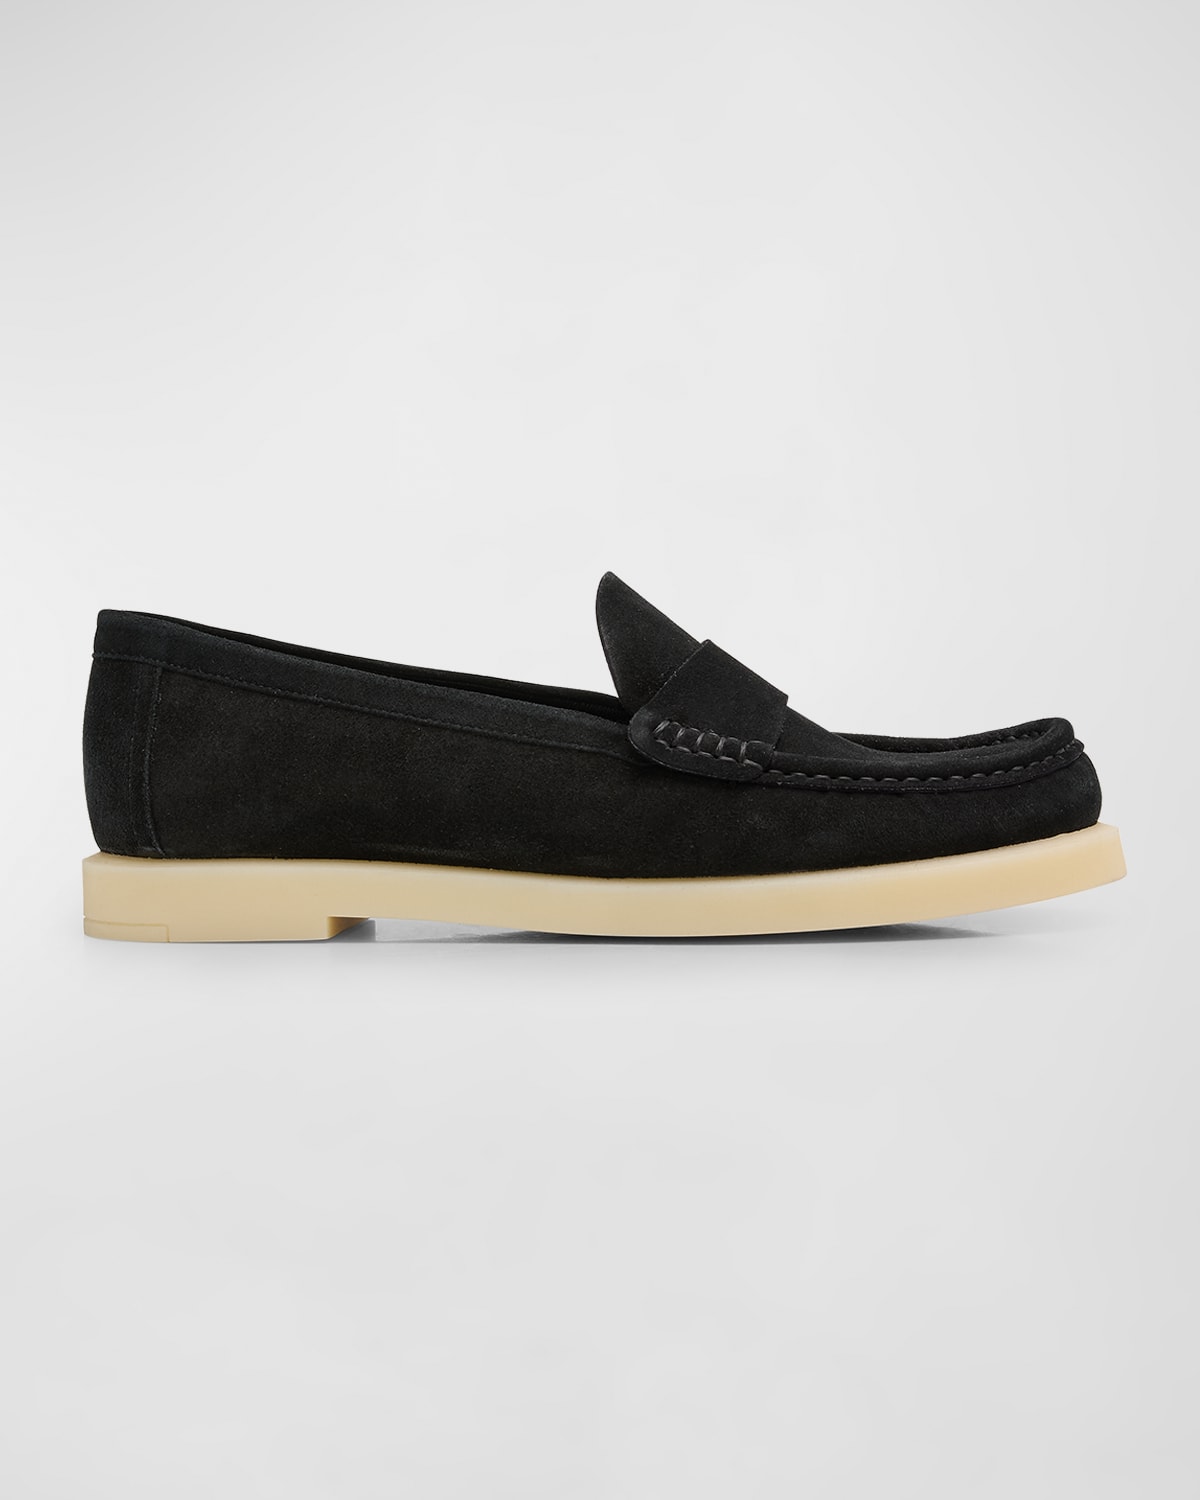 Blake Luxe Suede Slip-On Loafers